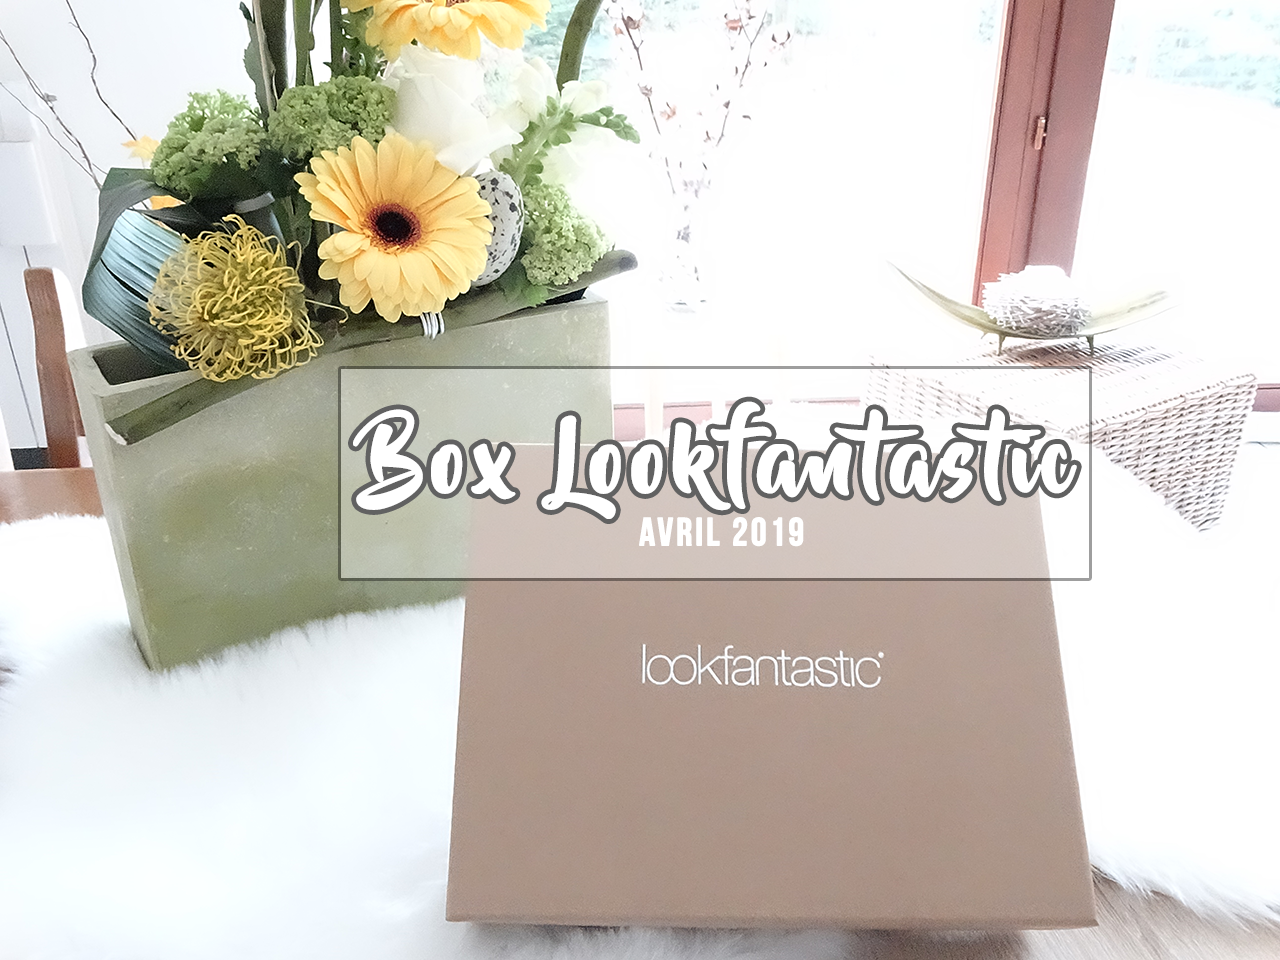 Unboxing - Box Lookfantastic d'avril 2019 ♢ By Elodie